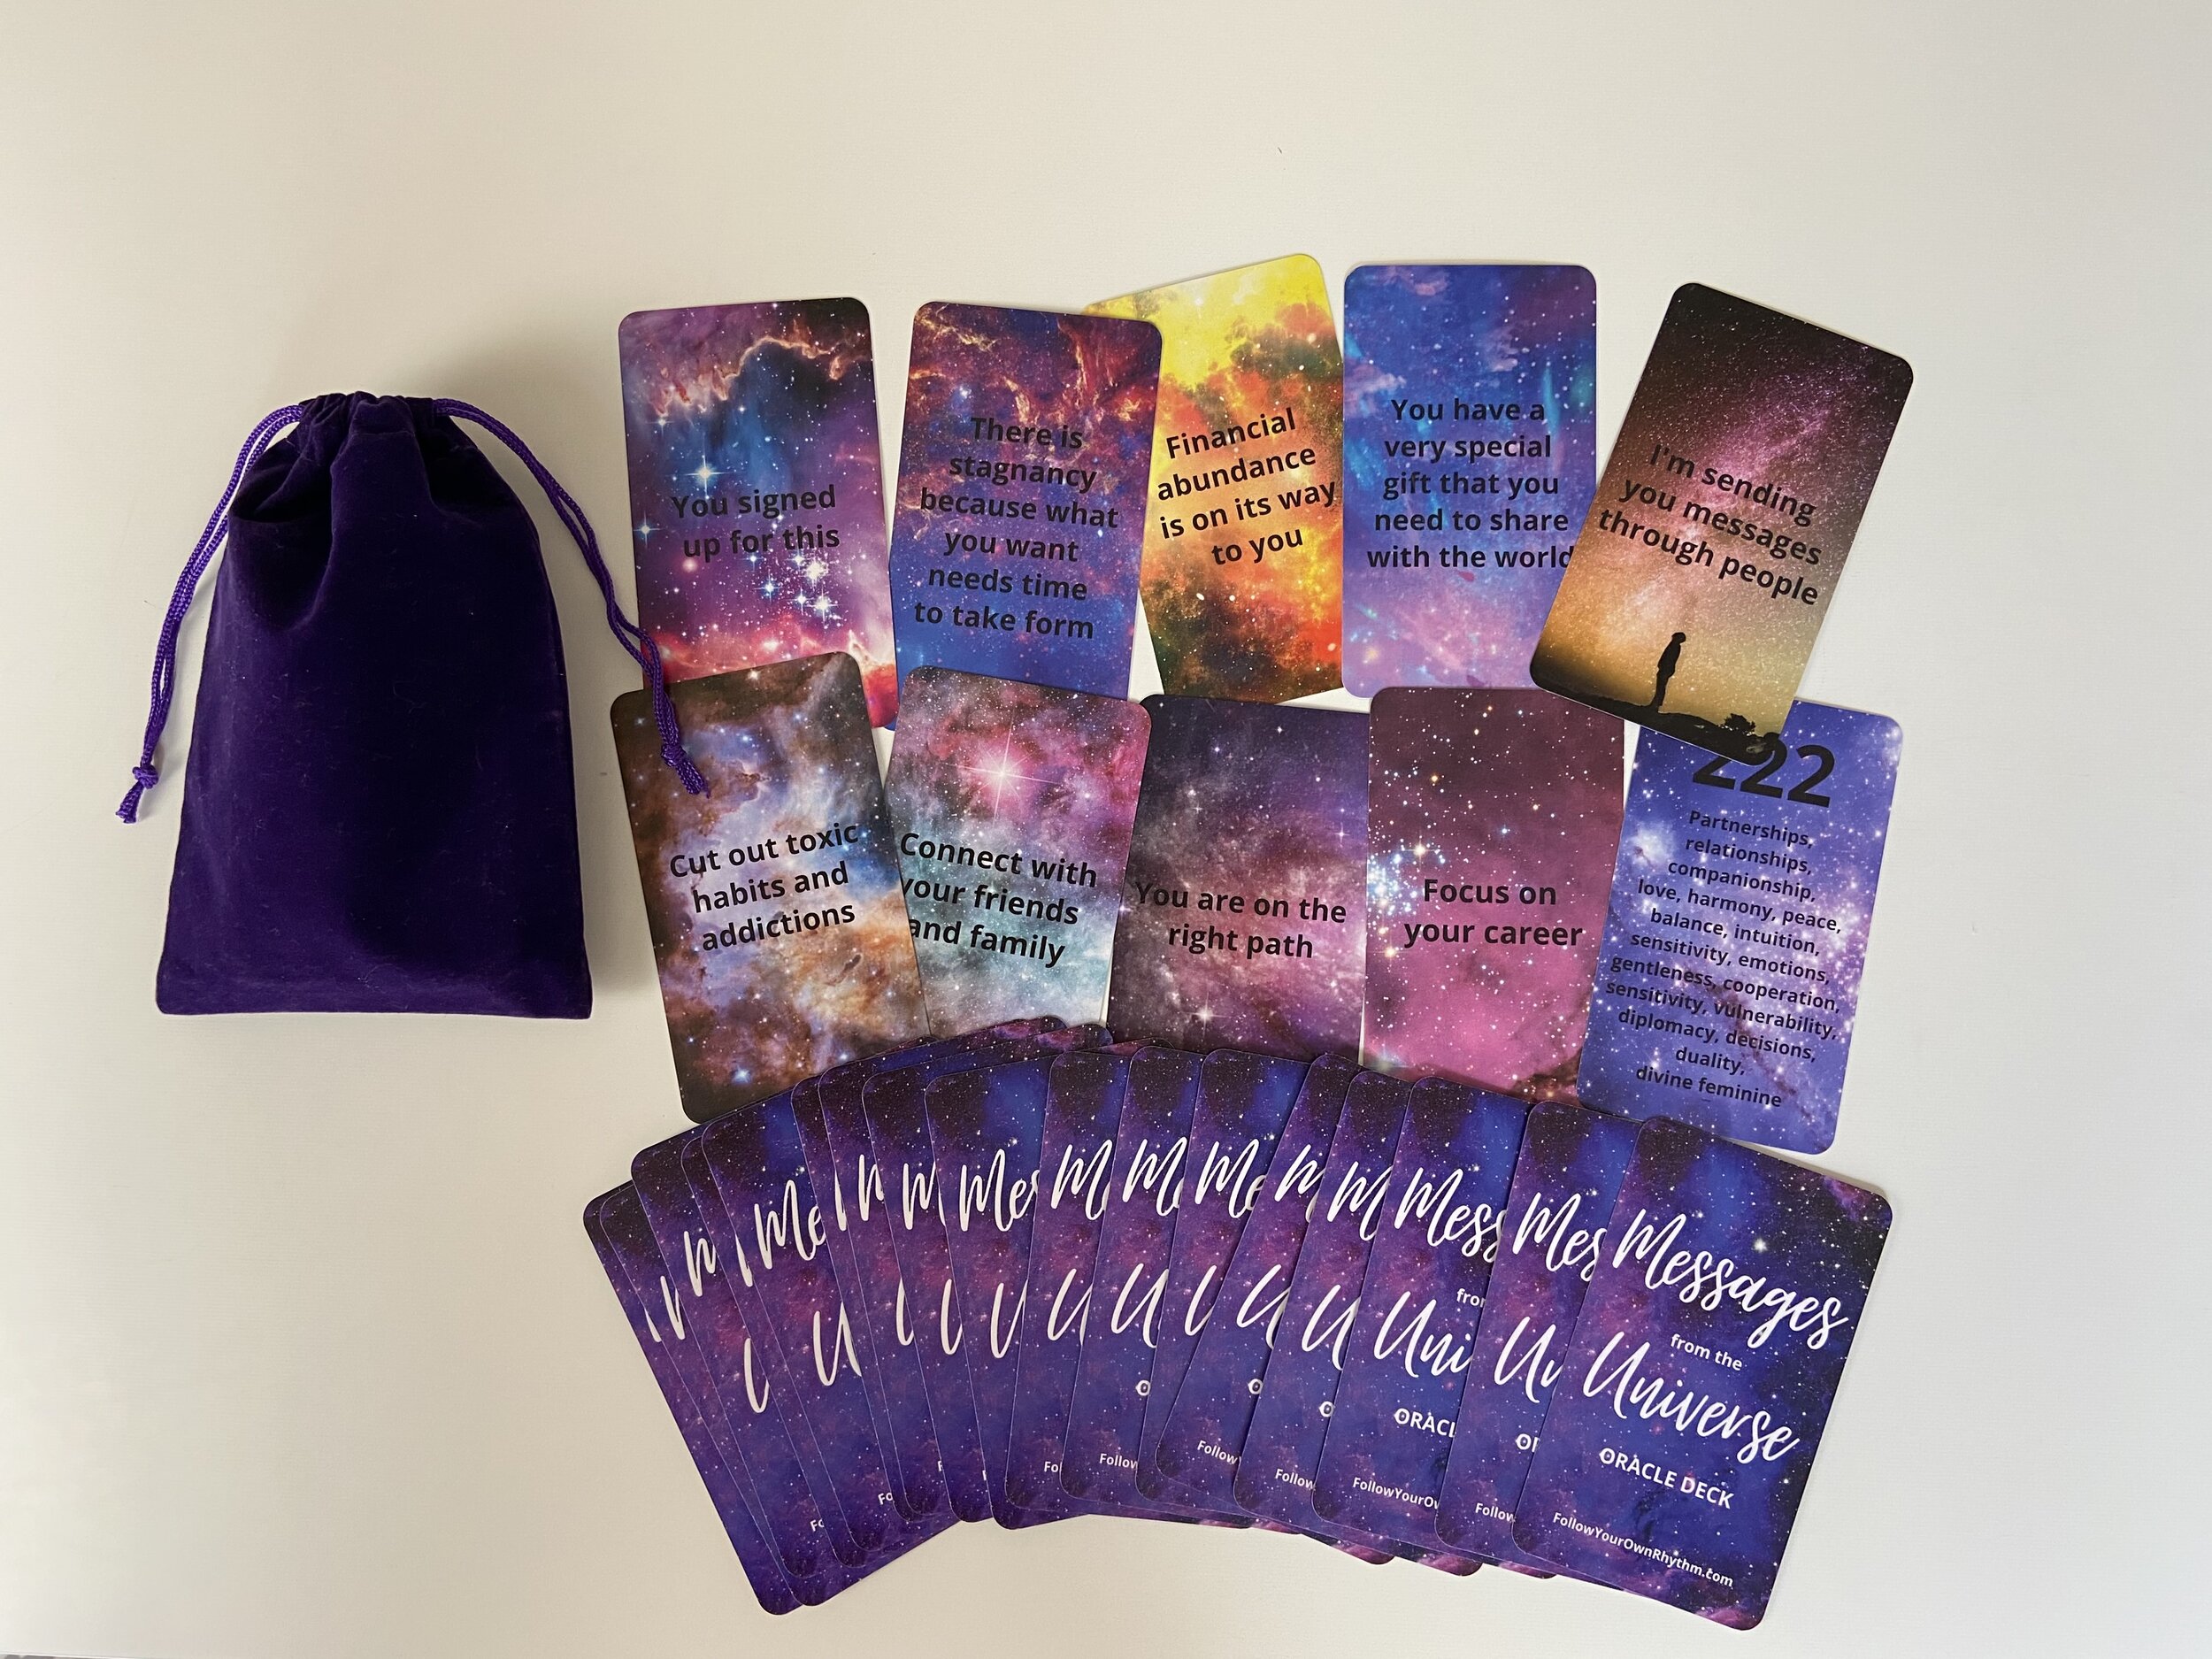 MESSAGES FROM THE UNIVERSE ORACLE DECK — Follow Your Own Rhythm